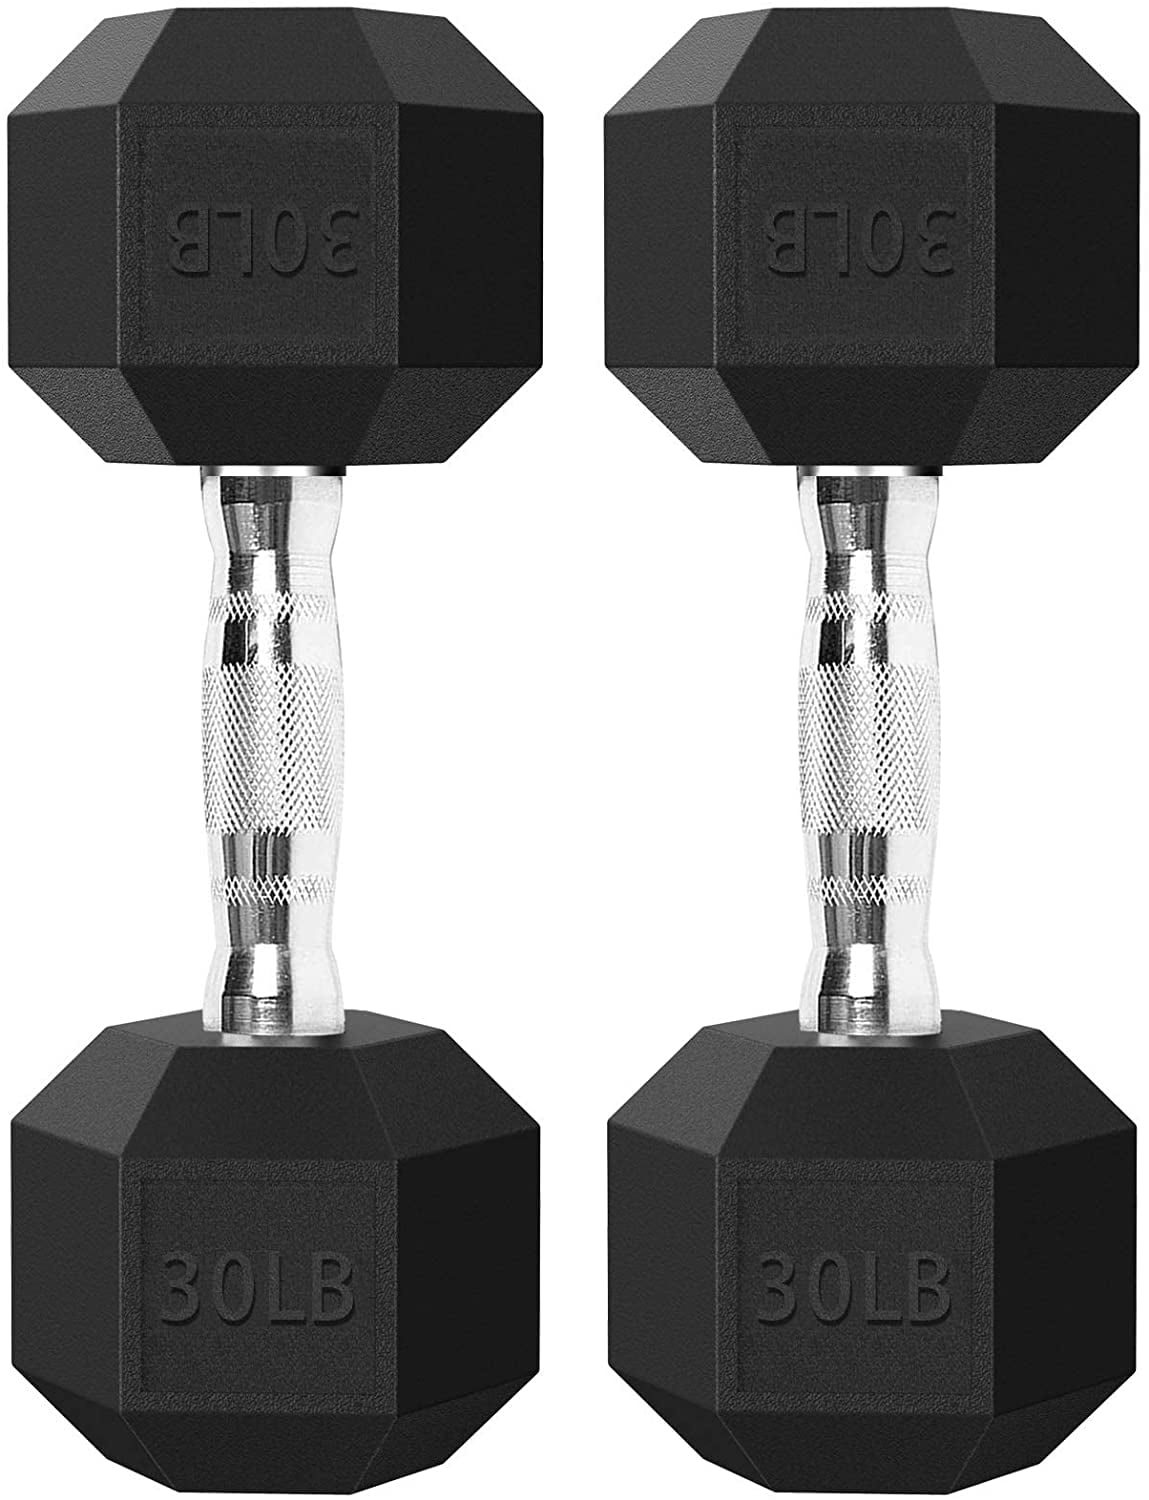 70 lbs Total Set of 20lb and 15lb Dumbbells Rubber Hex Pair Hand Weights 